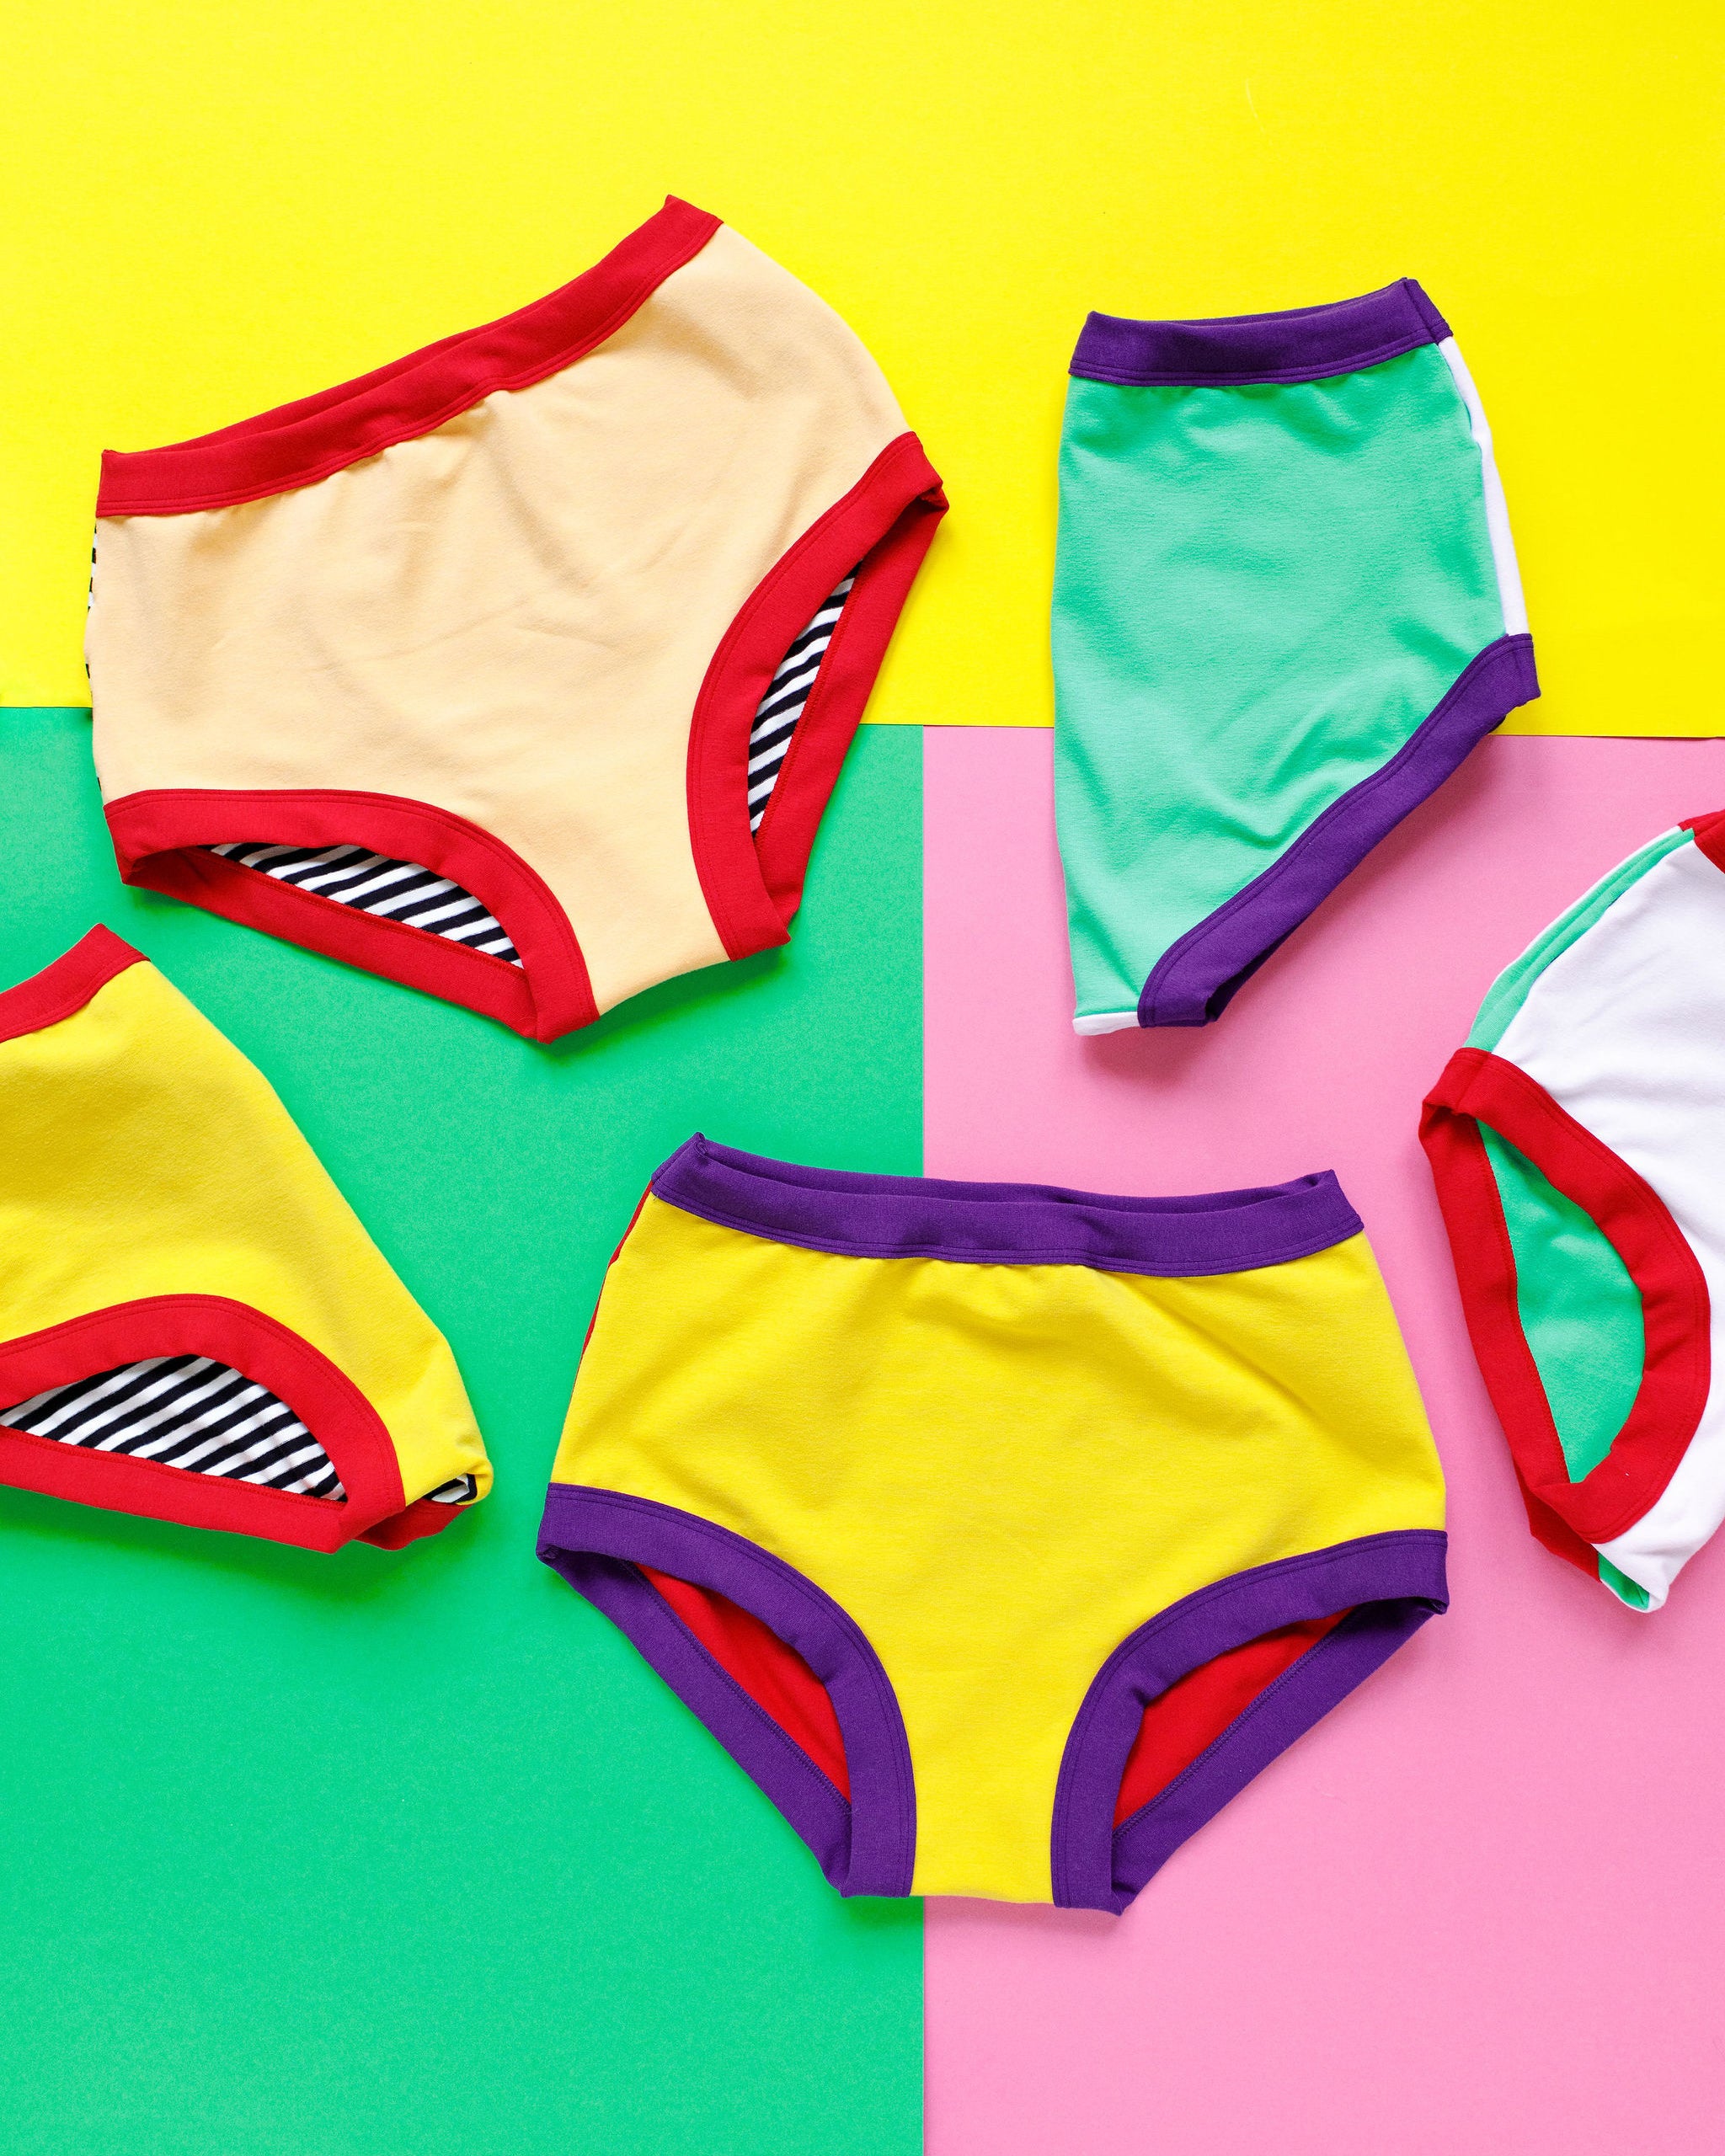 Flat lay of Thunderpants Hipster and Original style underwear - combination of different solids and prints.